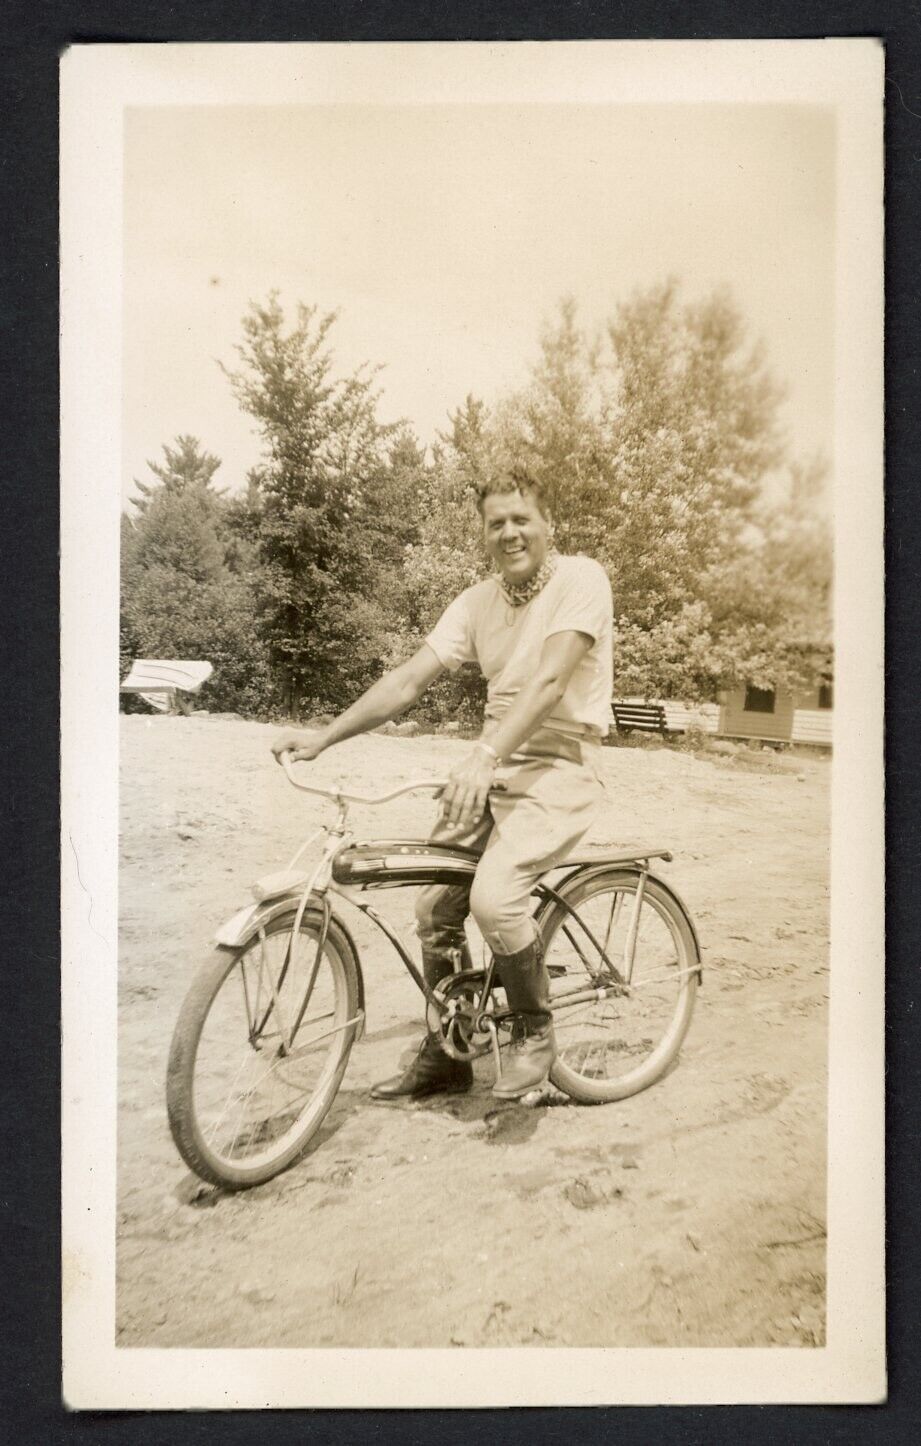 Smiling Handsome Man on Roadmaster ? Bicycle 1930s Photo Americana Cycling